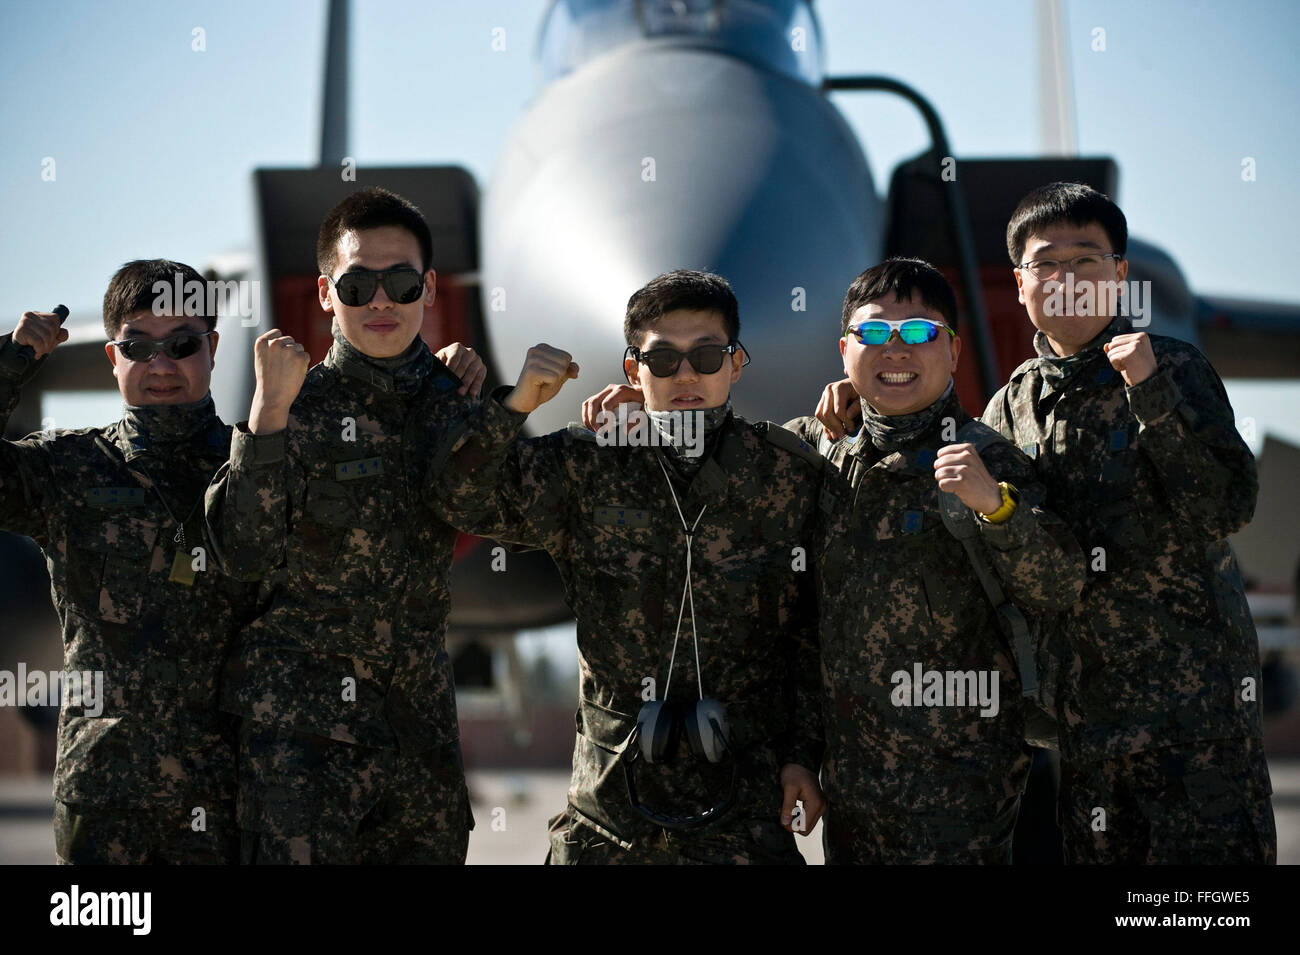 Republic of Korea Air Force Airmen pose for a photo during Red Flag 12-2 at Nellis Air Force Base, Nev. Red Flag is a realistic combat training exercise involving the air forces of the United States and its allies. The exercise is hosted north of Las Vegas on the Nevada Test and Training Range. Stock Photo